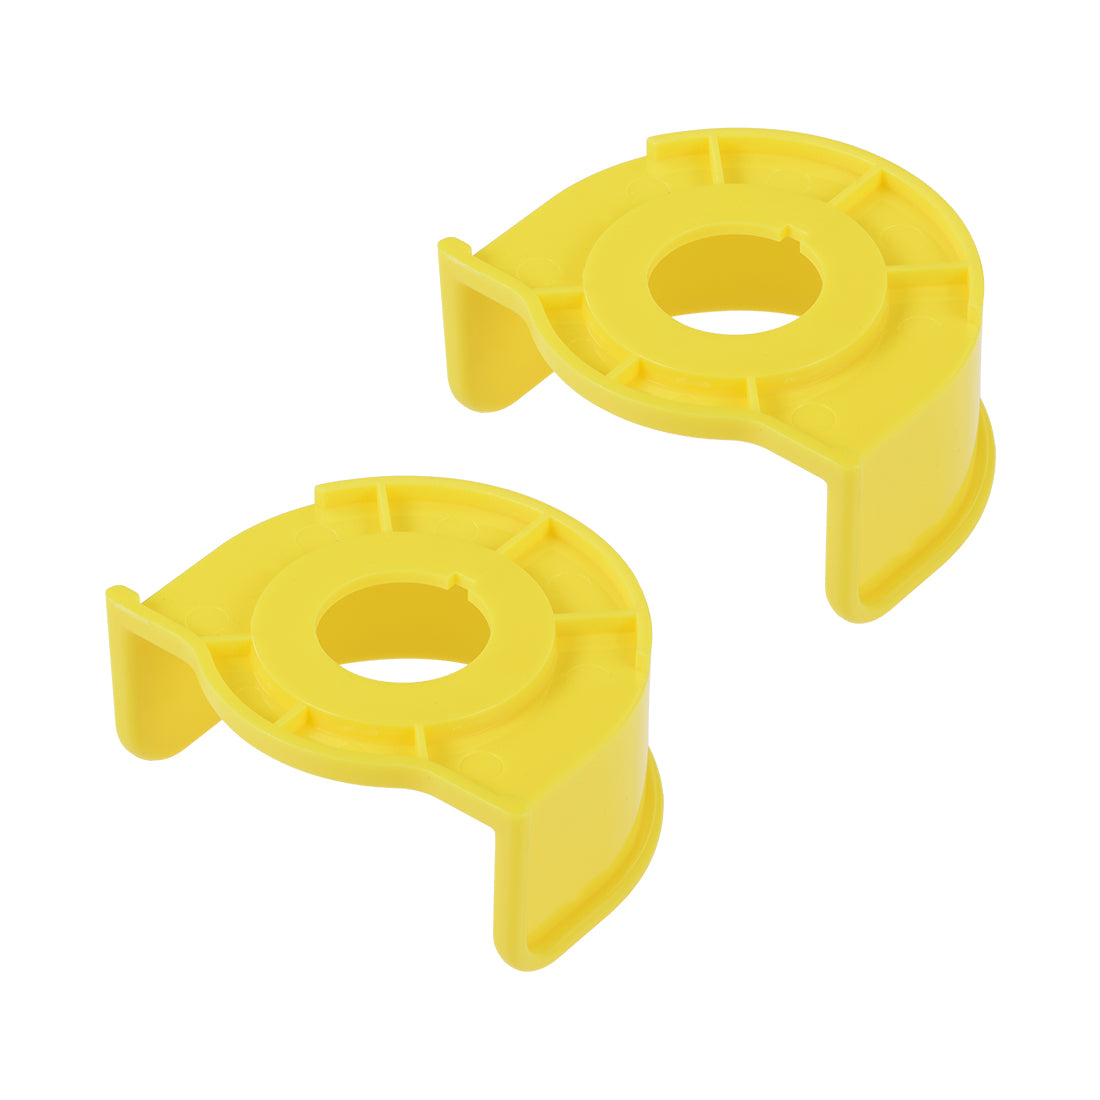 Uxcell Uxcell 22mm Half Circle Emergency Stop Switch Push Switch Button Protective Cover Yellow 2pcs